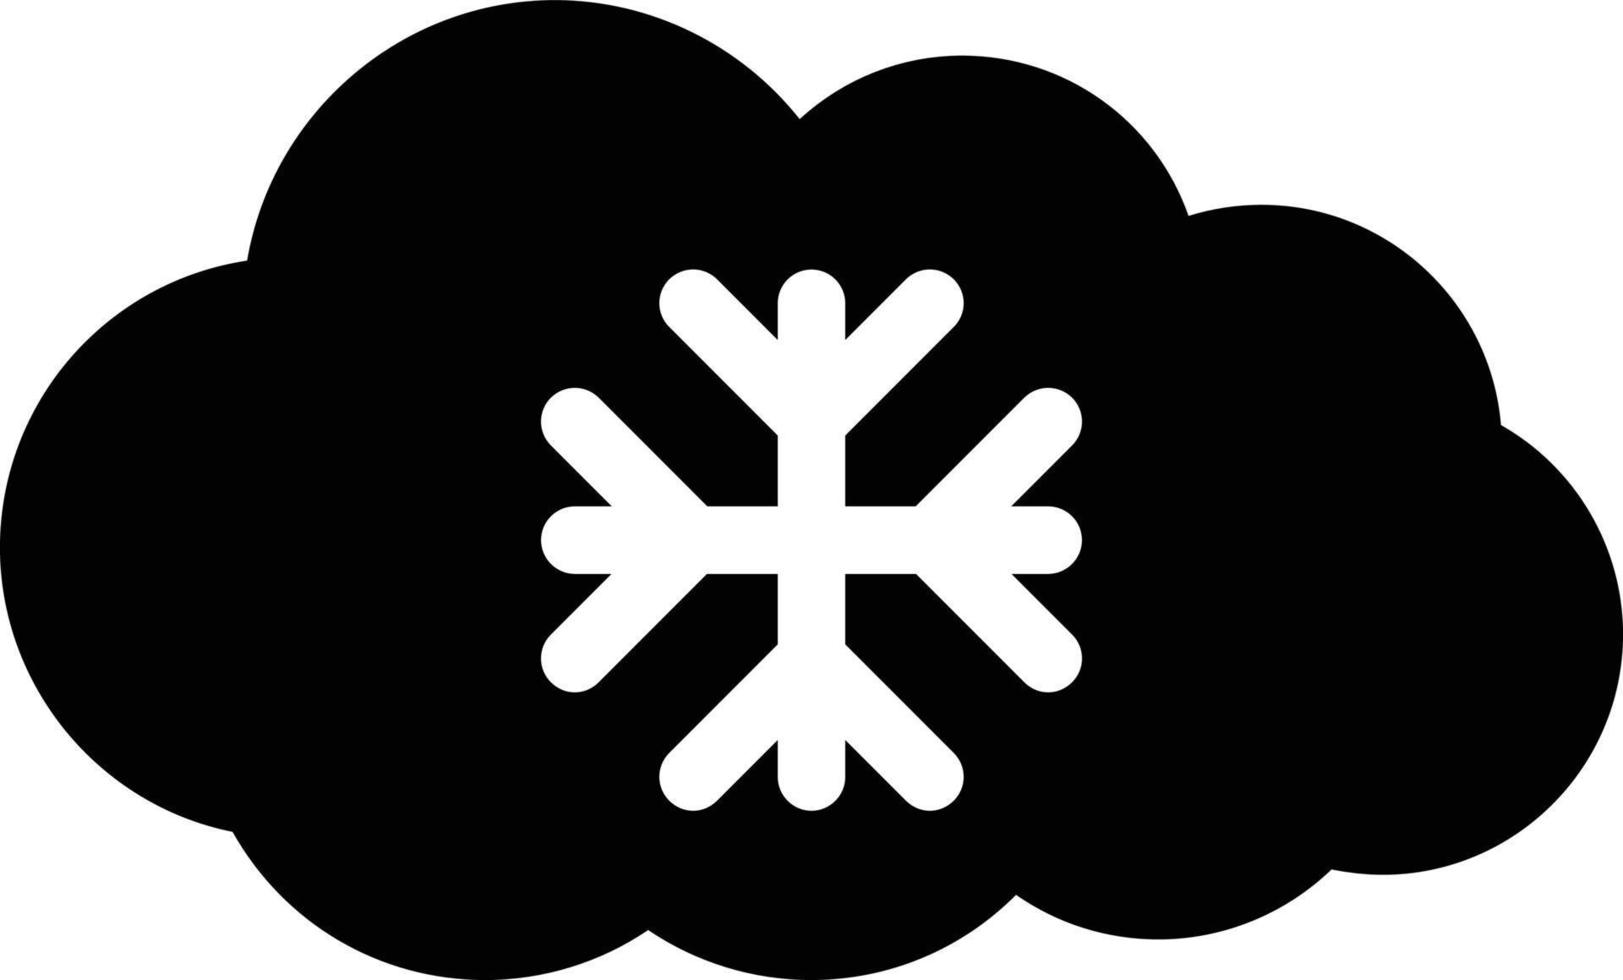 snowflake vector illustration on a background.Premium quality symbols.vector icons for concept and graphic design.